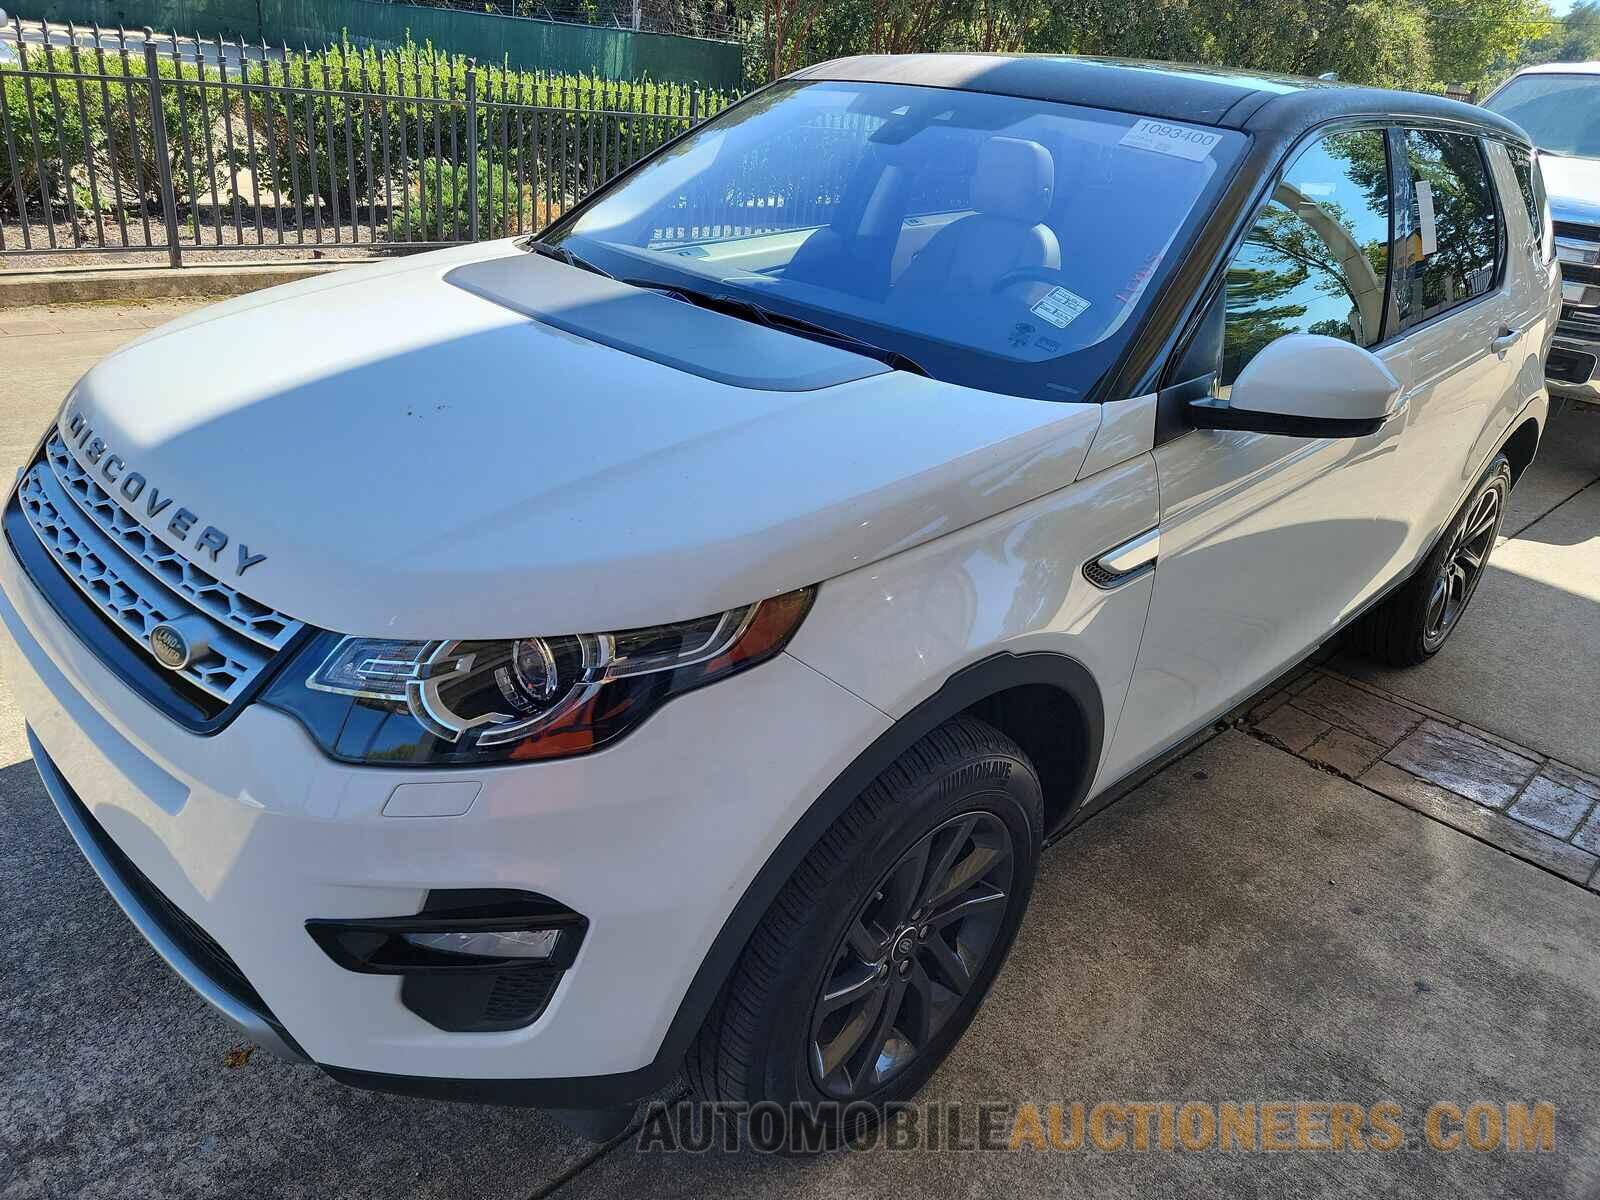 SALCR2RX7JH761361 Land Rover Discovery Sport 2018